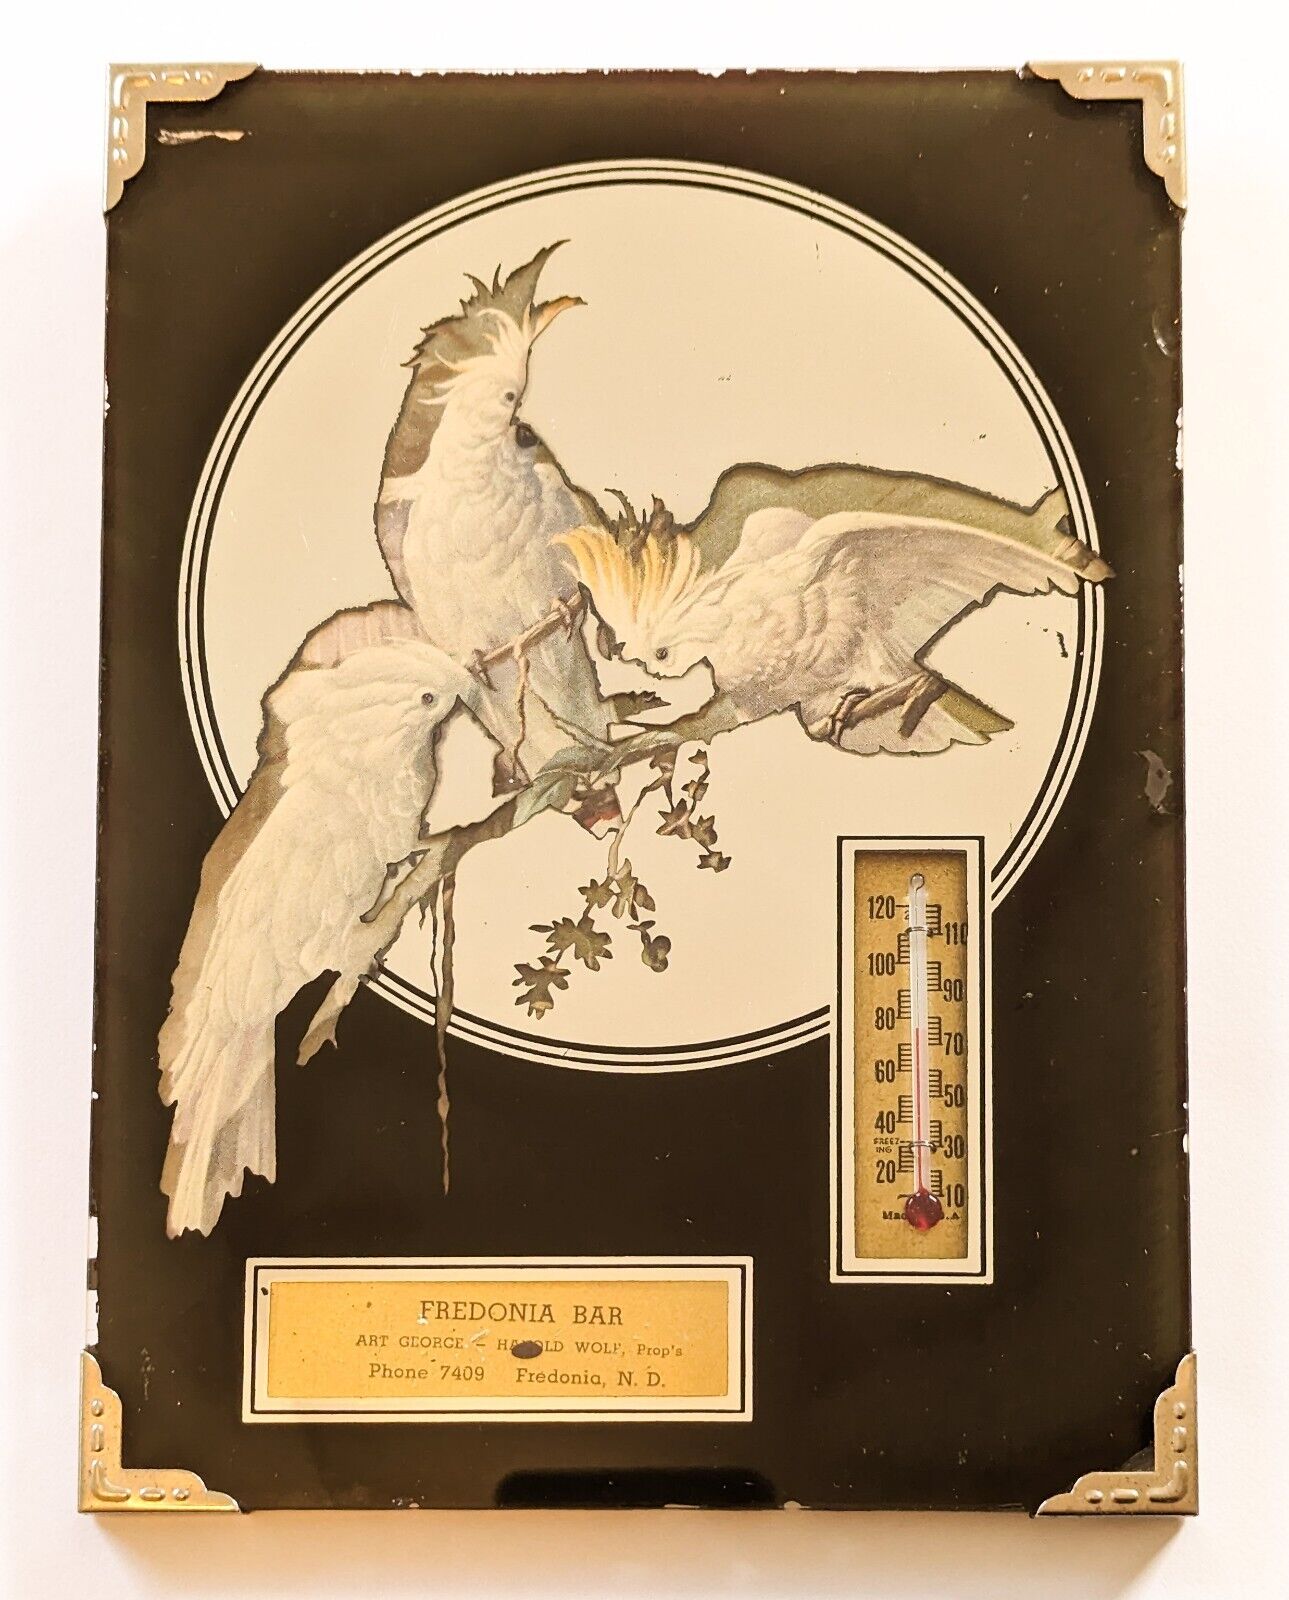 1930s Black Advertising Mirror w/ Thermometer feat Cockatiels • Fredonia, ND Bar